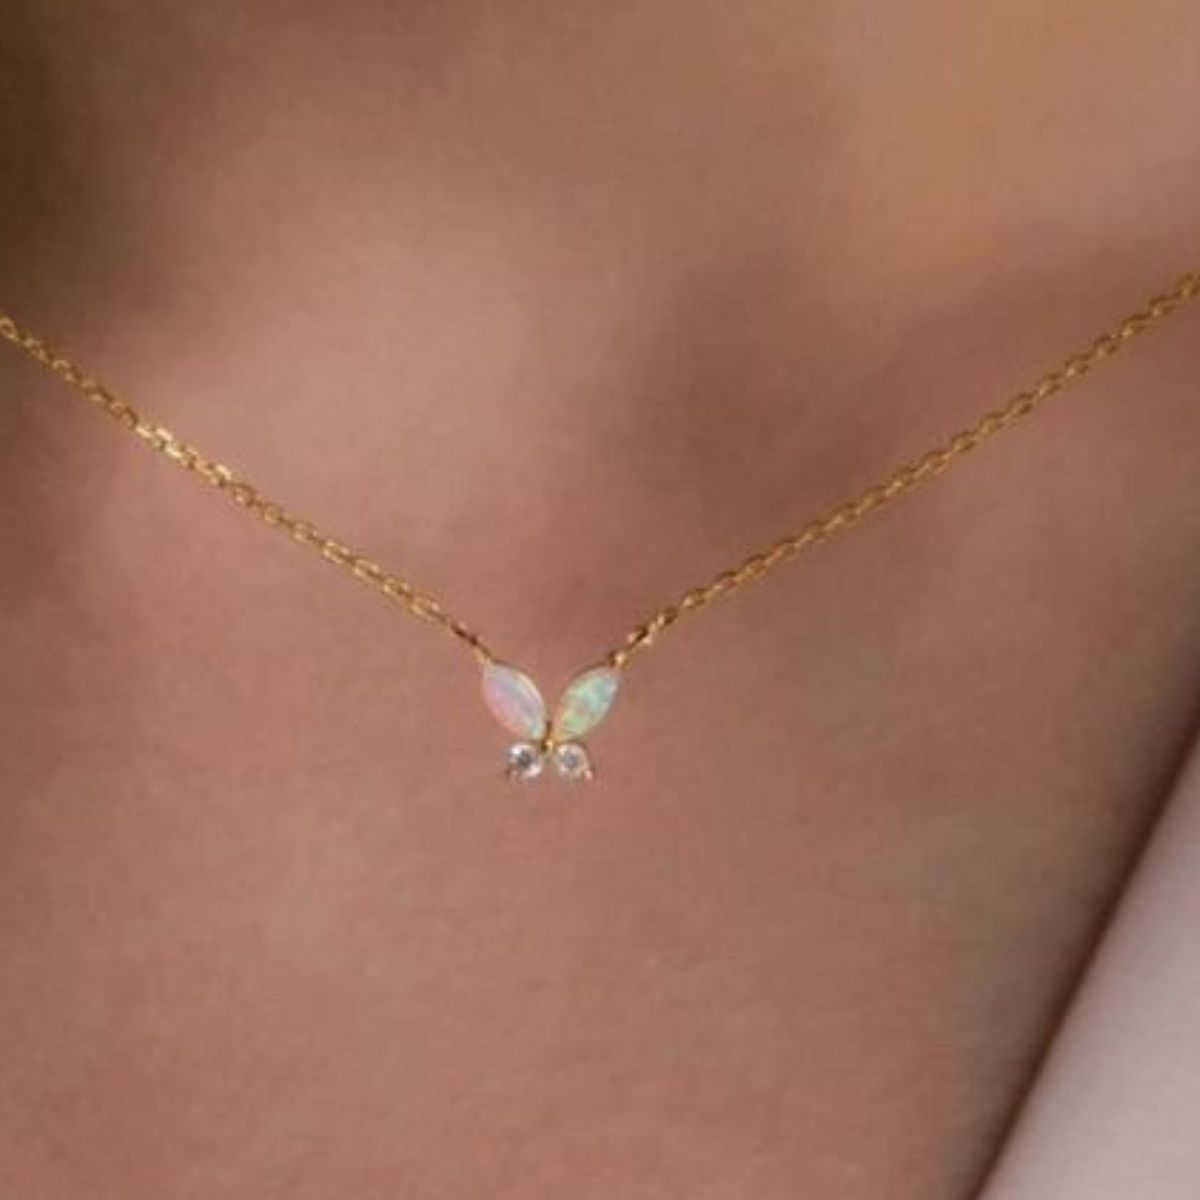 Titanium Steel Natural Opal Butterfly Necklace